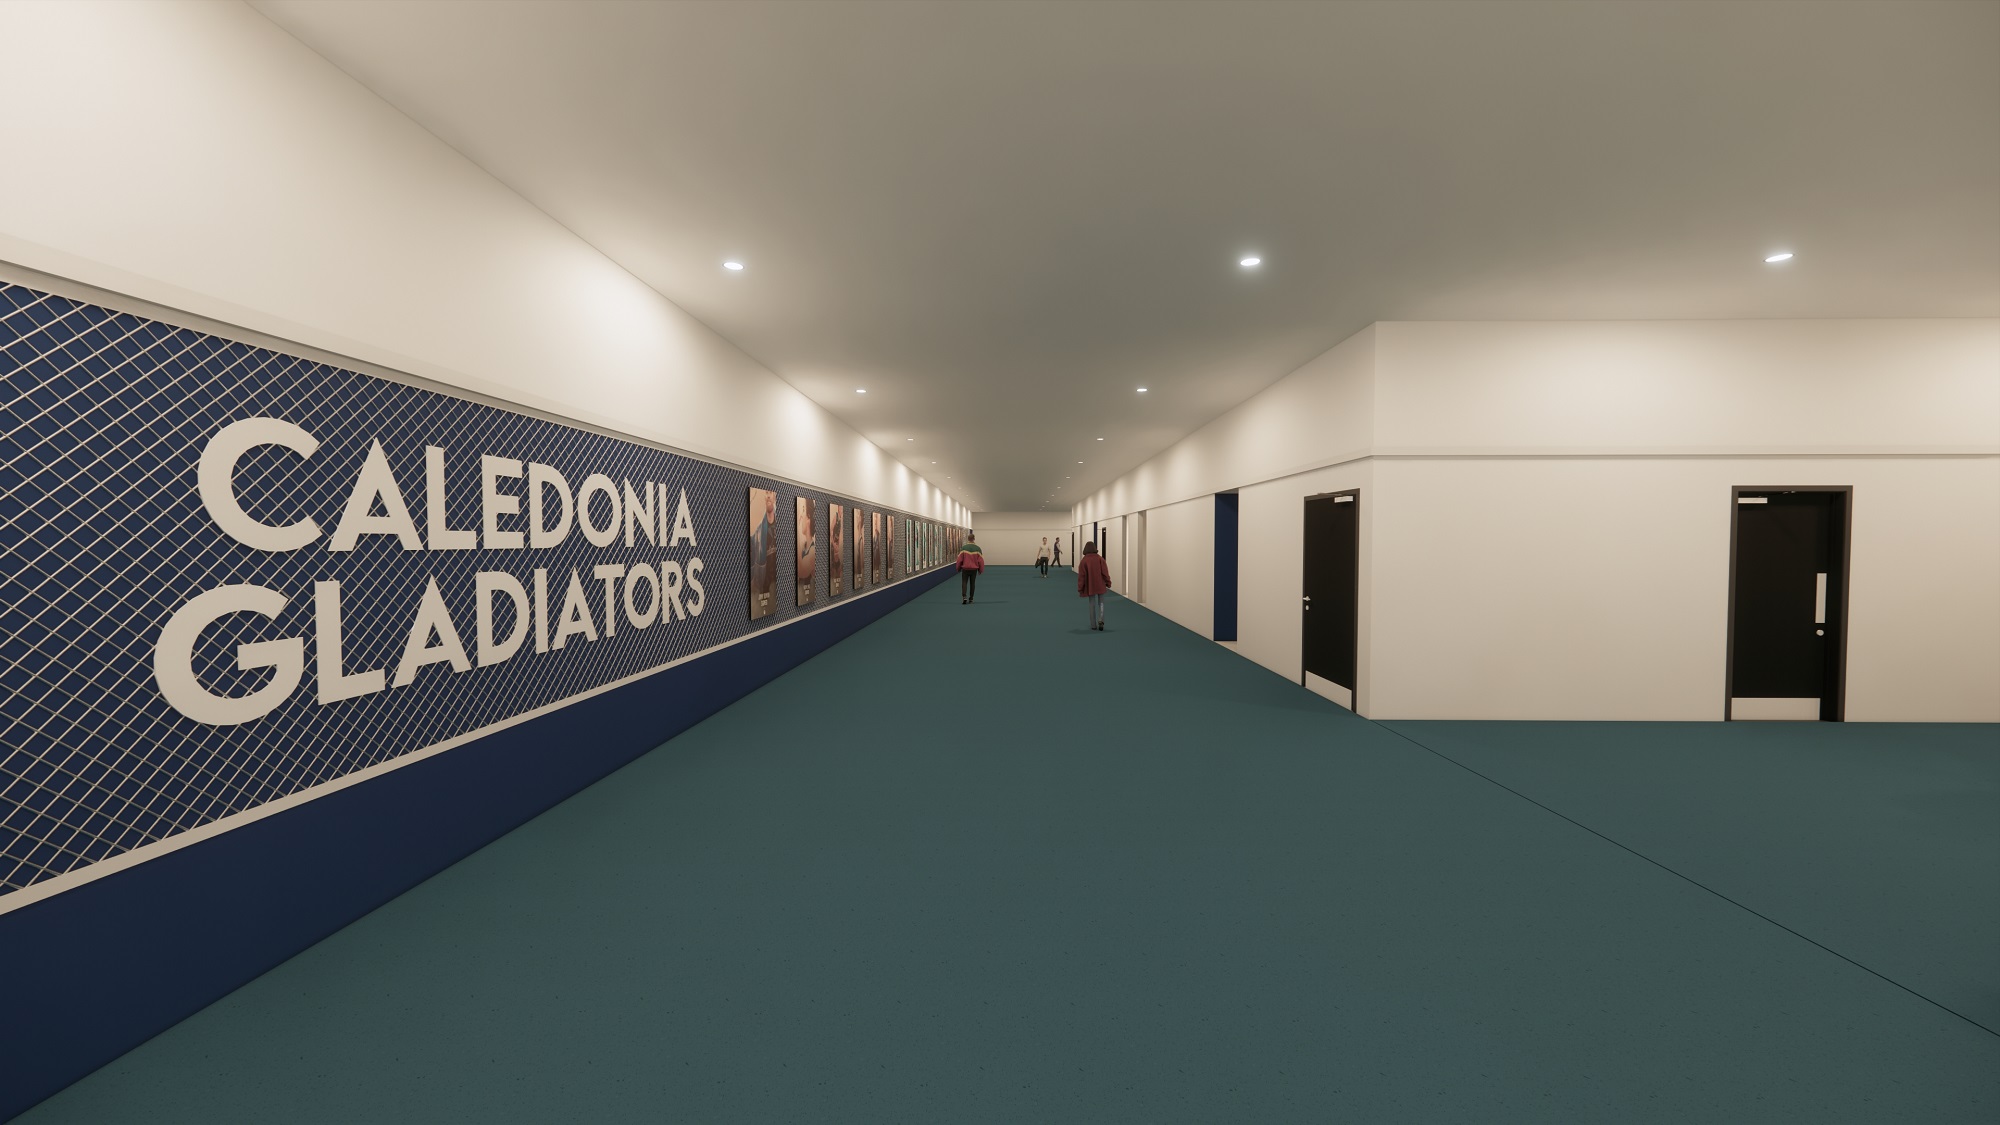 In Pictures: First look inside Caledonia Gladiators’ new stadium